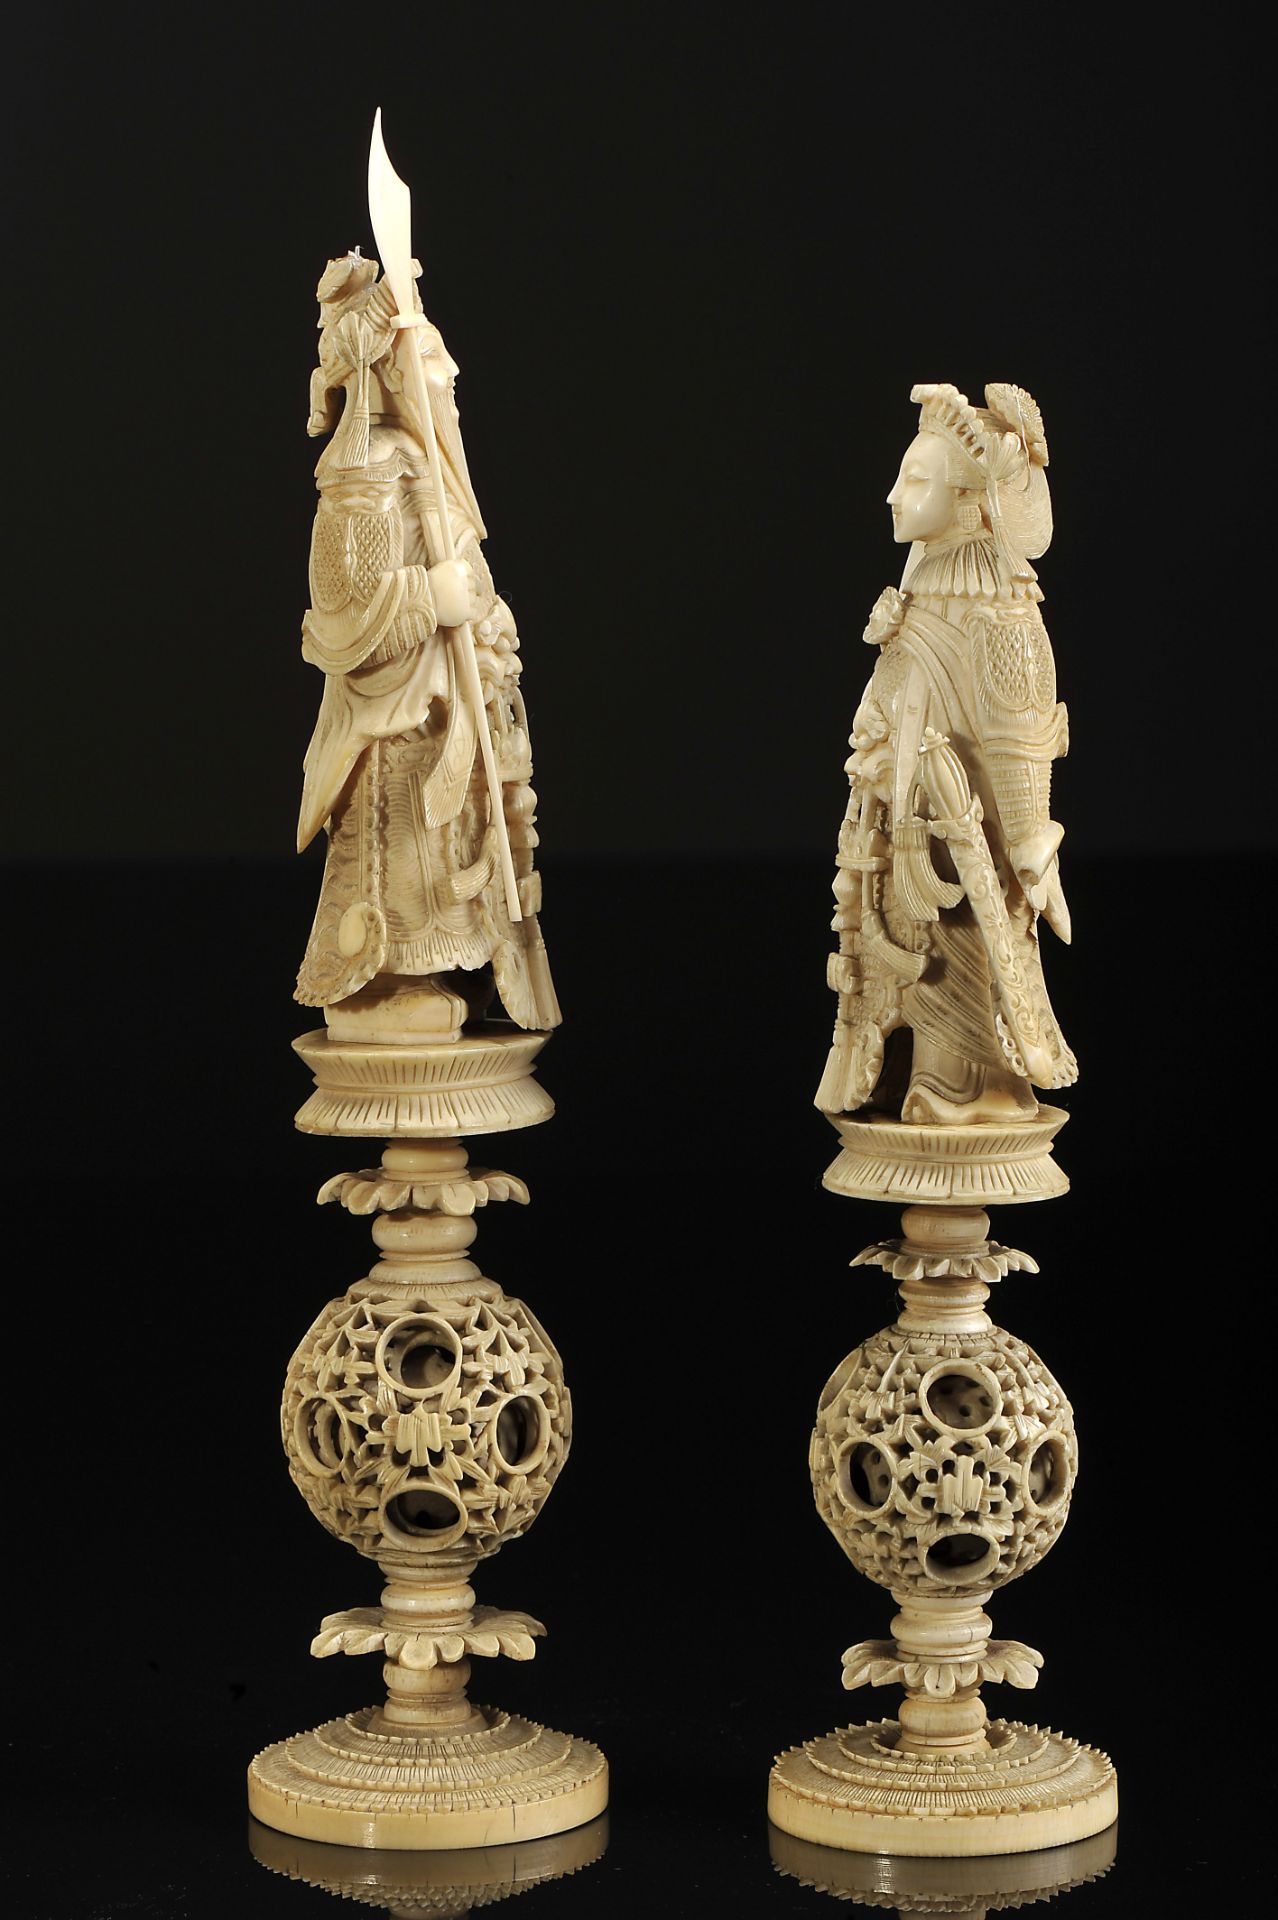 Chess pieces, "Emperor" and "Empress" based on "Ball of happiness" - Image 2 of 4